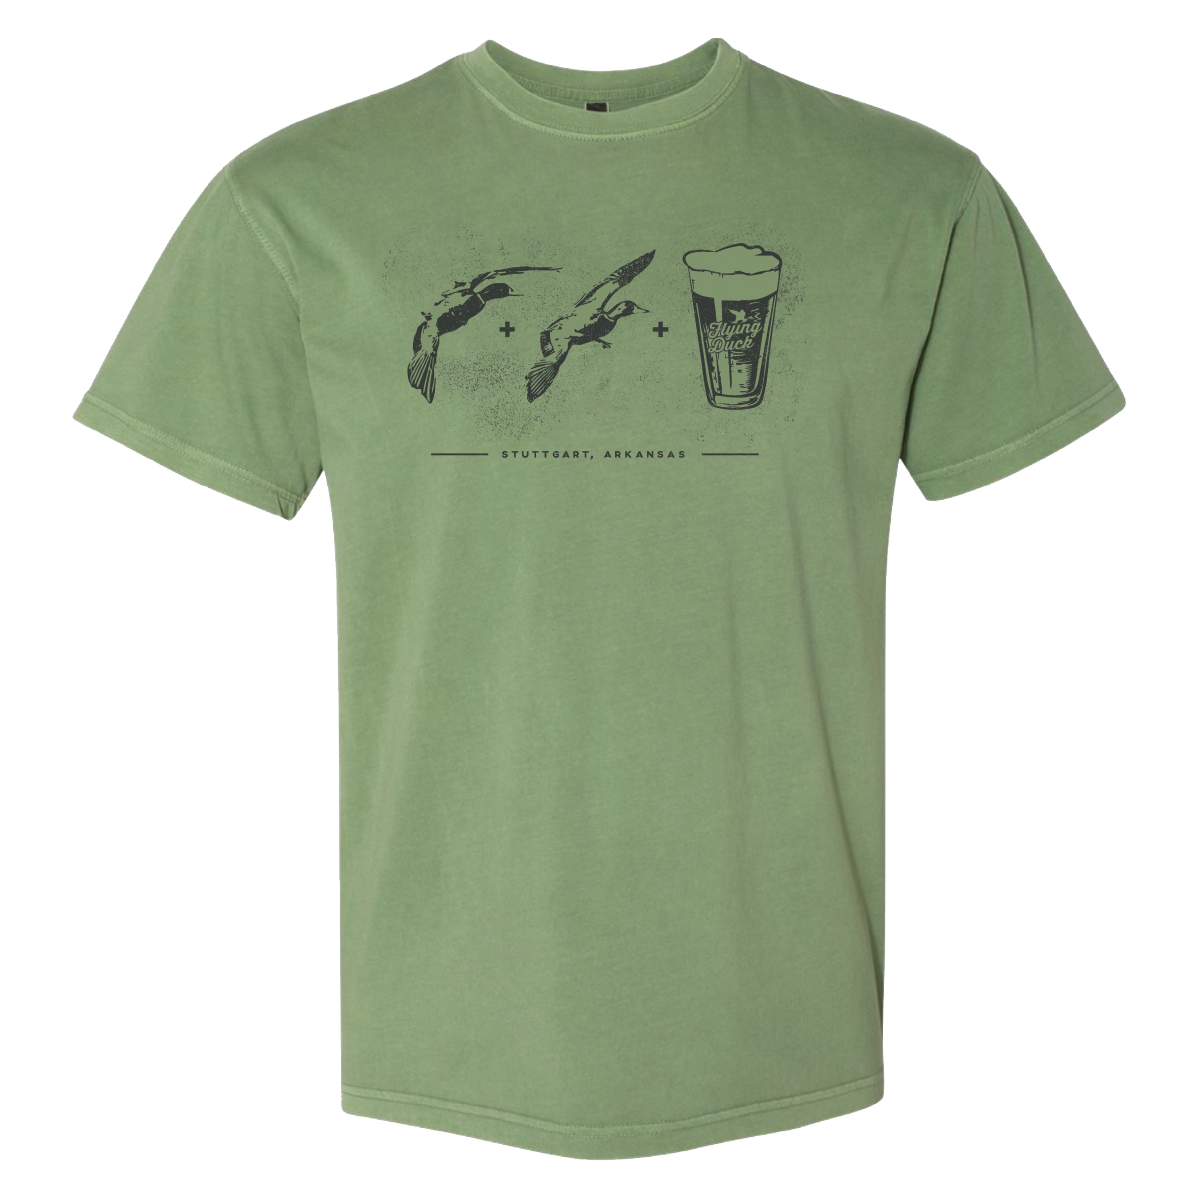 Flying Duck Co. Taproom T-Shirt - NEW